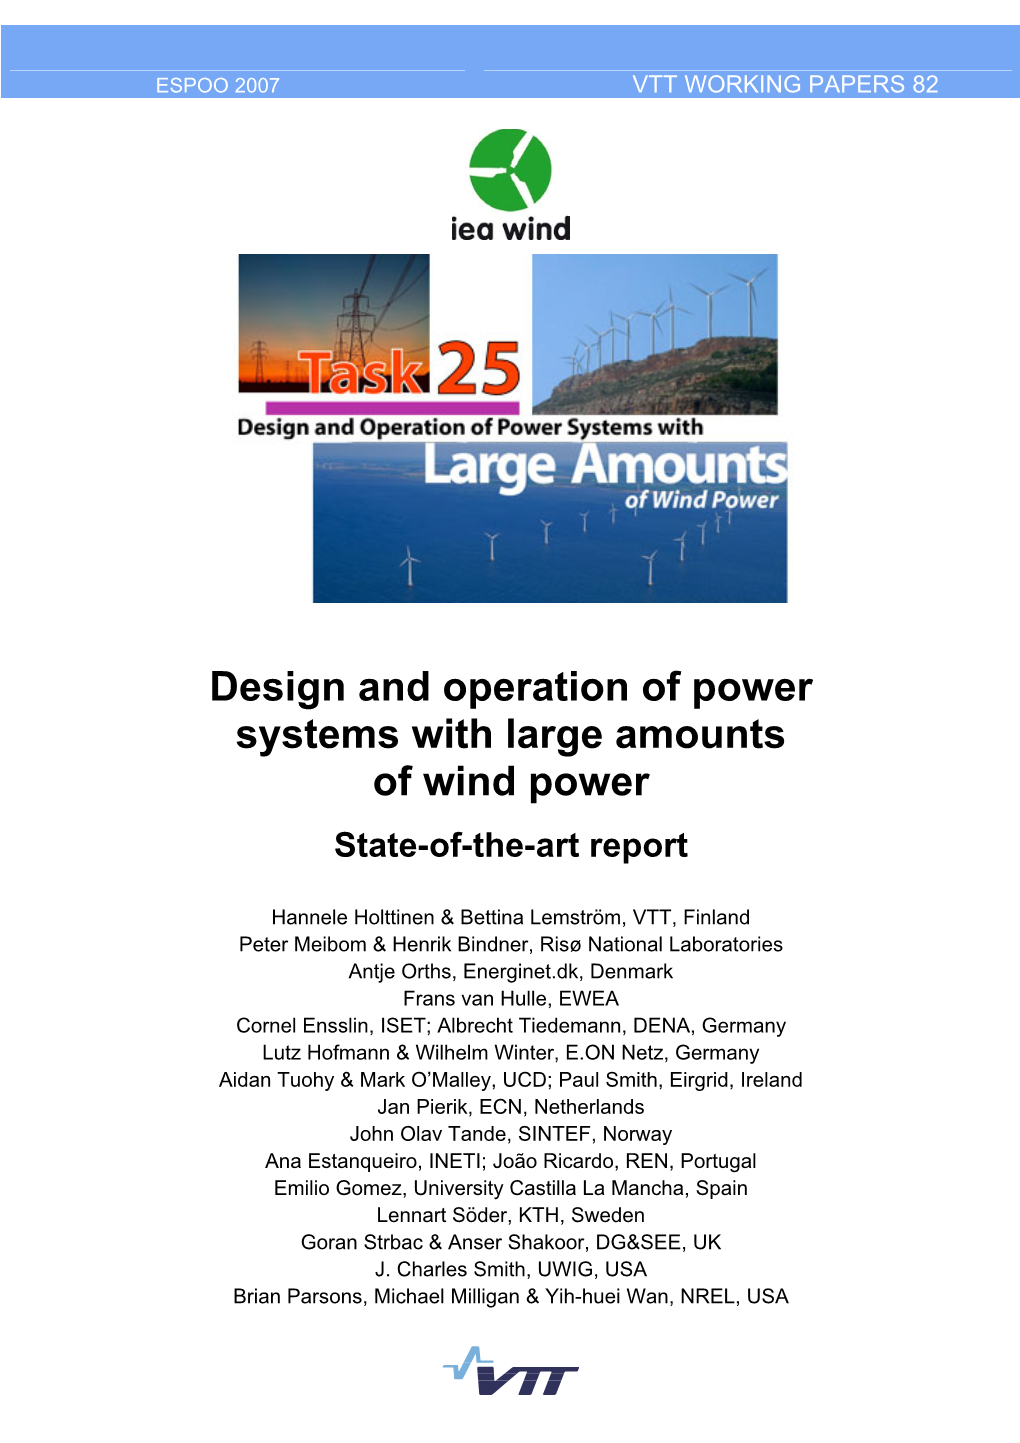 Design and Operation of Power Systems with Large Amounts. State